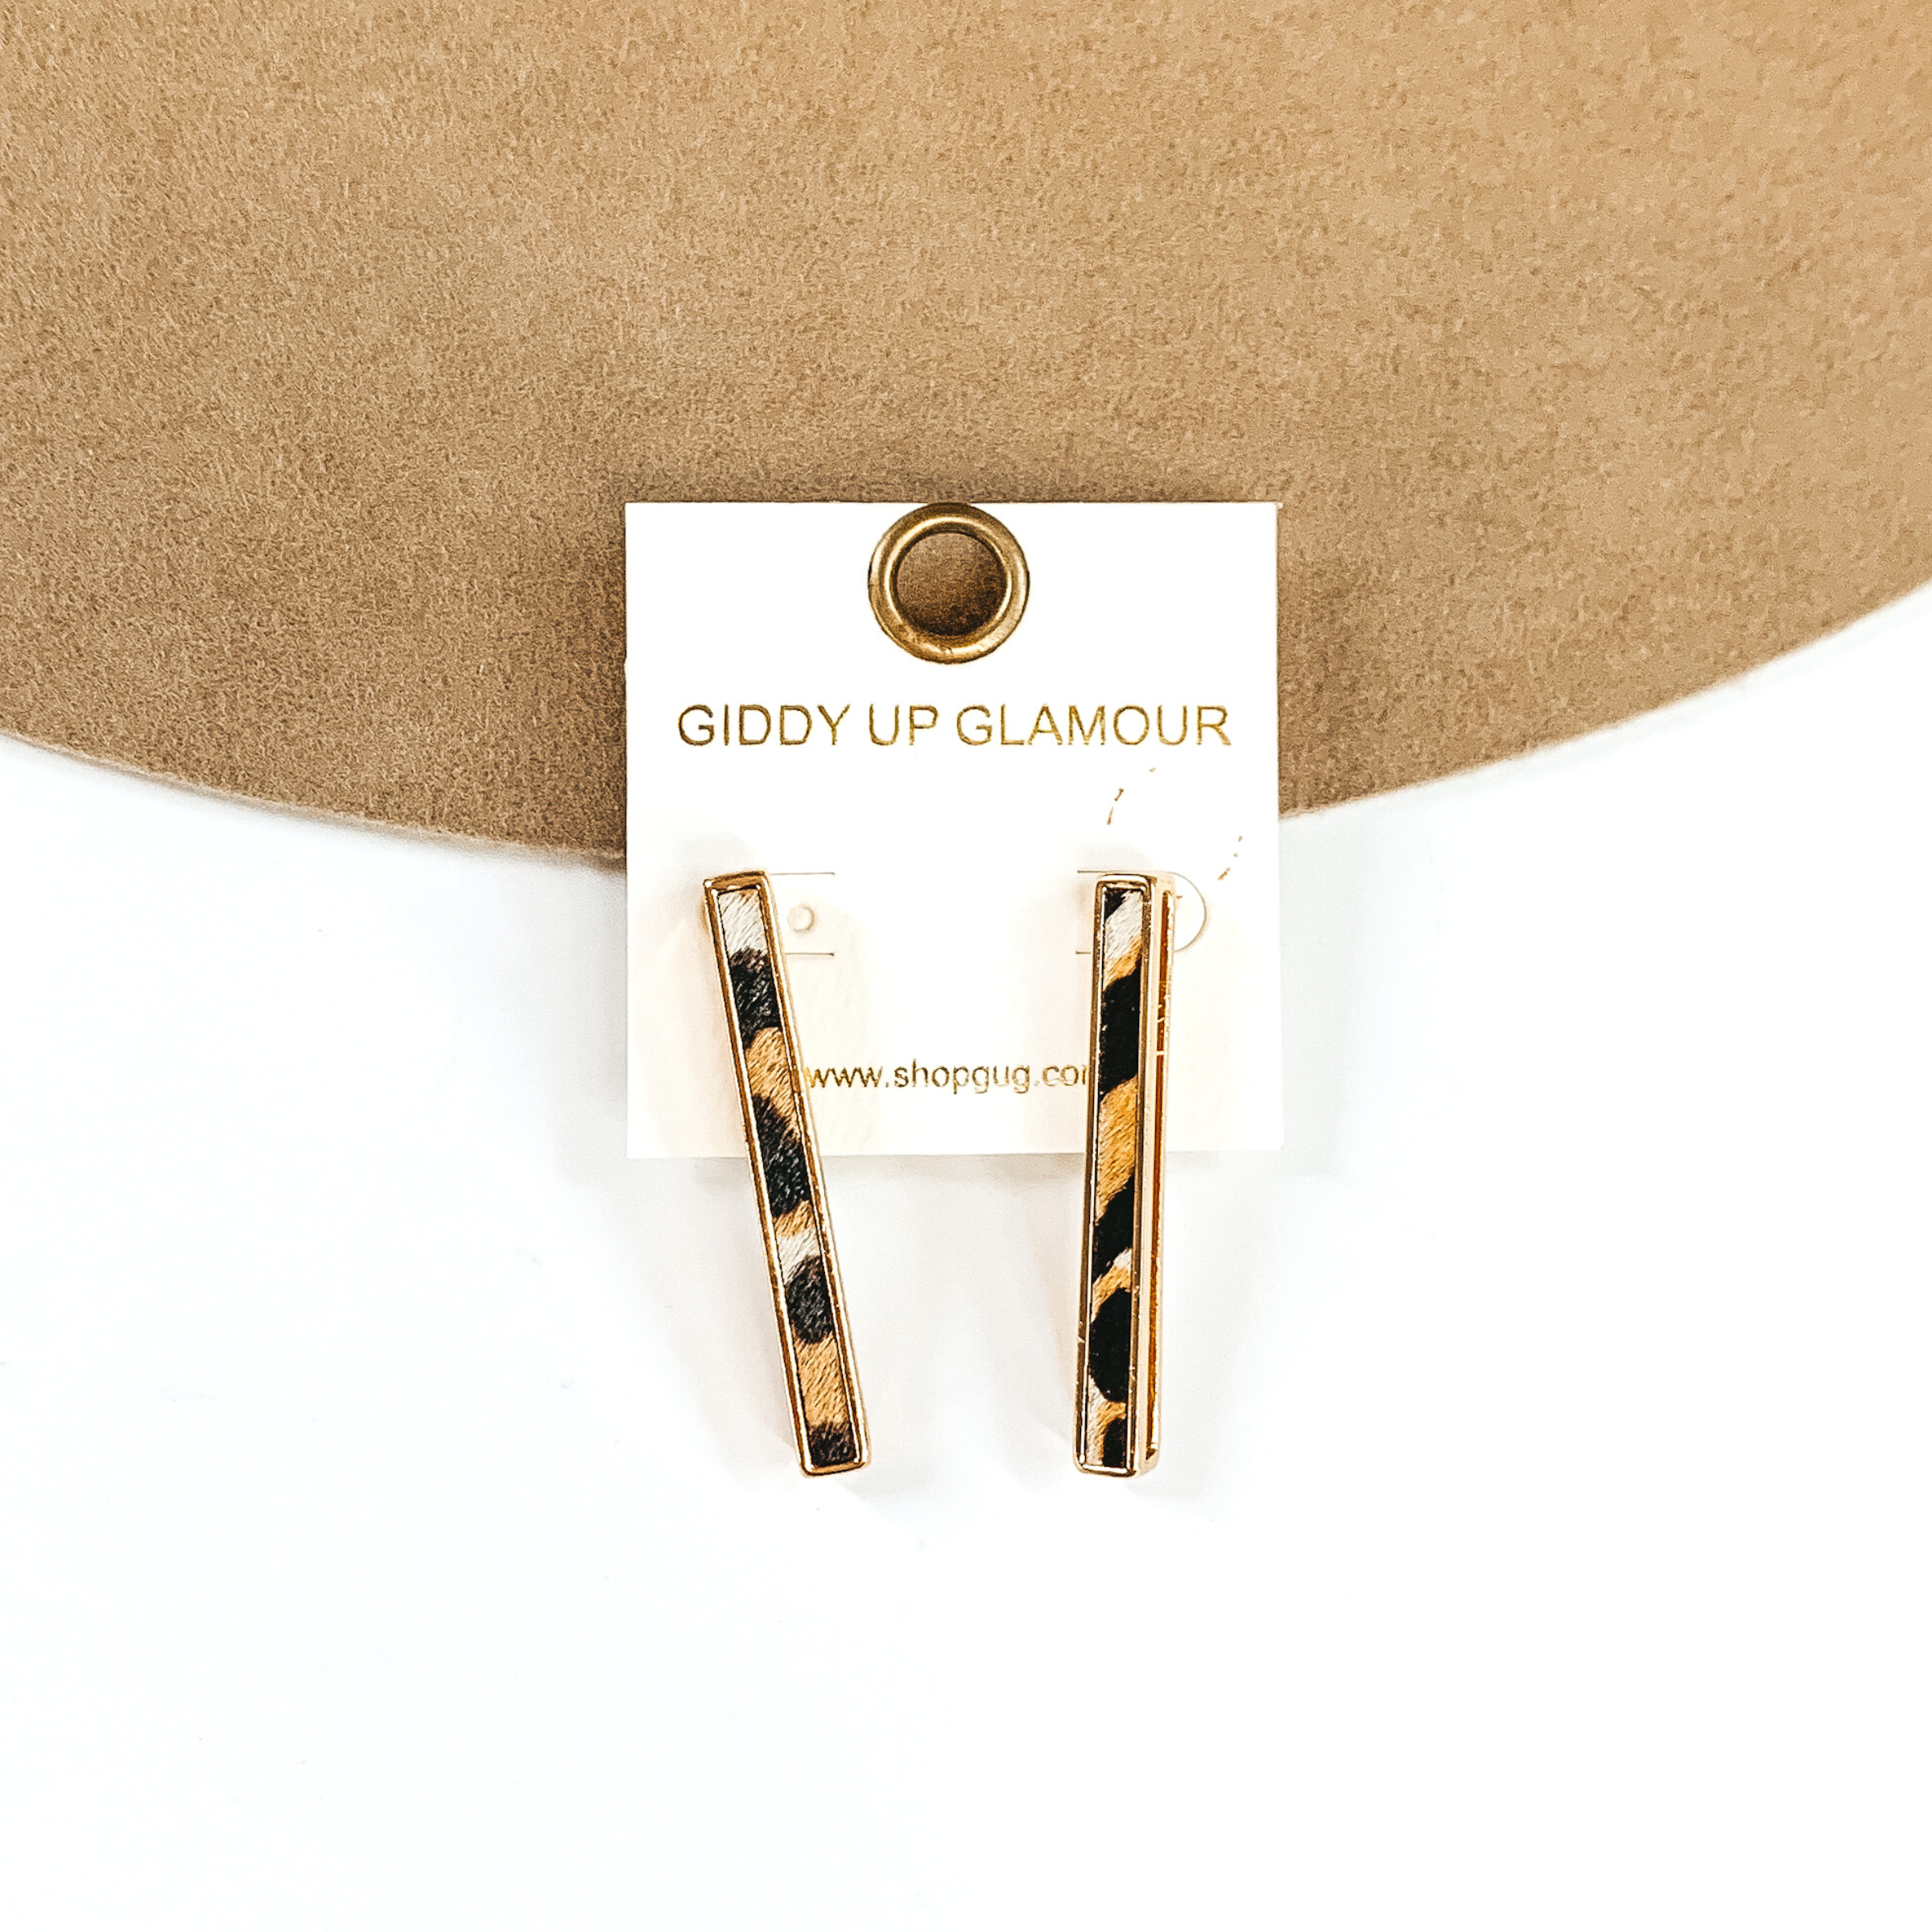 Gold rectangle bar earrings with a white animal print inlay on a white earrings holder. These earrings are pictured on a white and tan background.